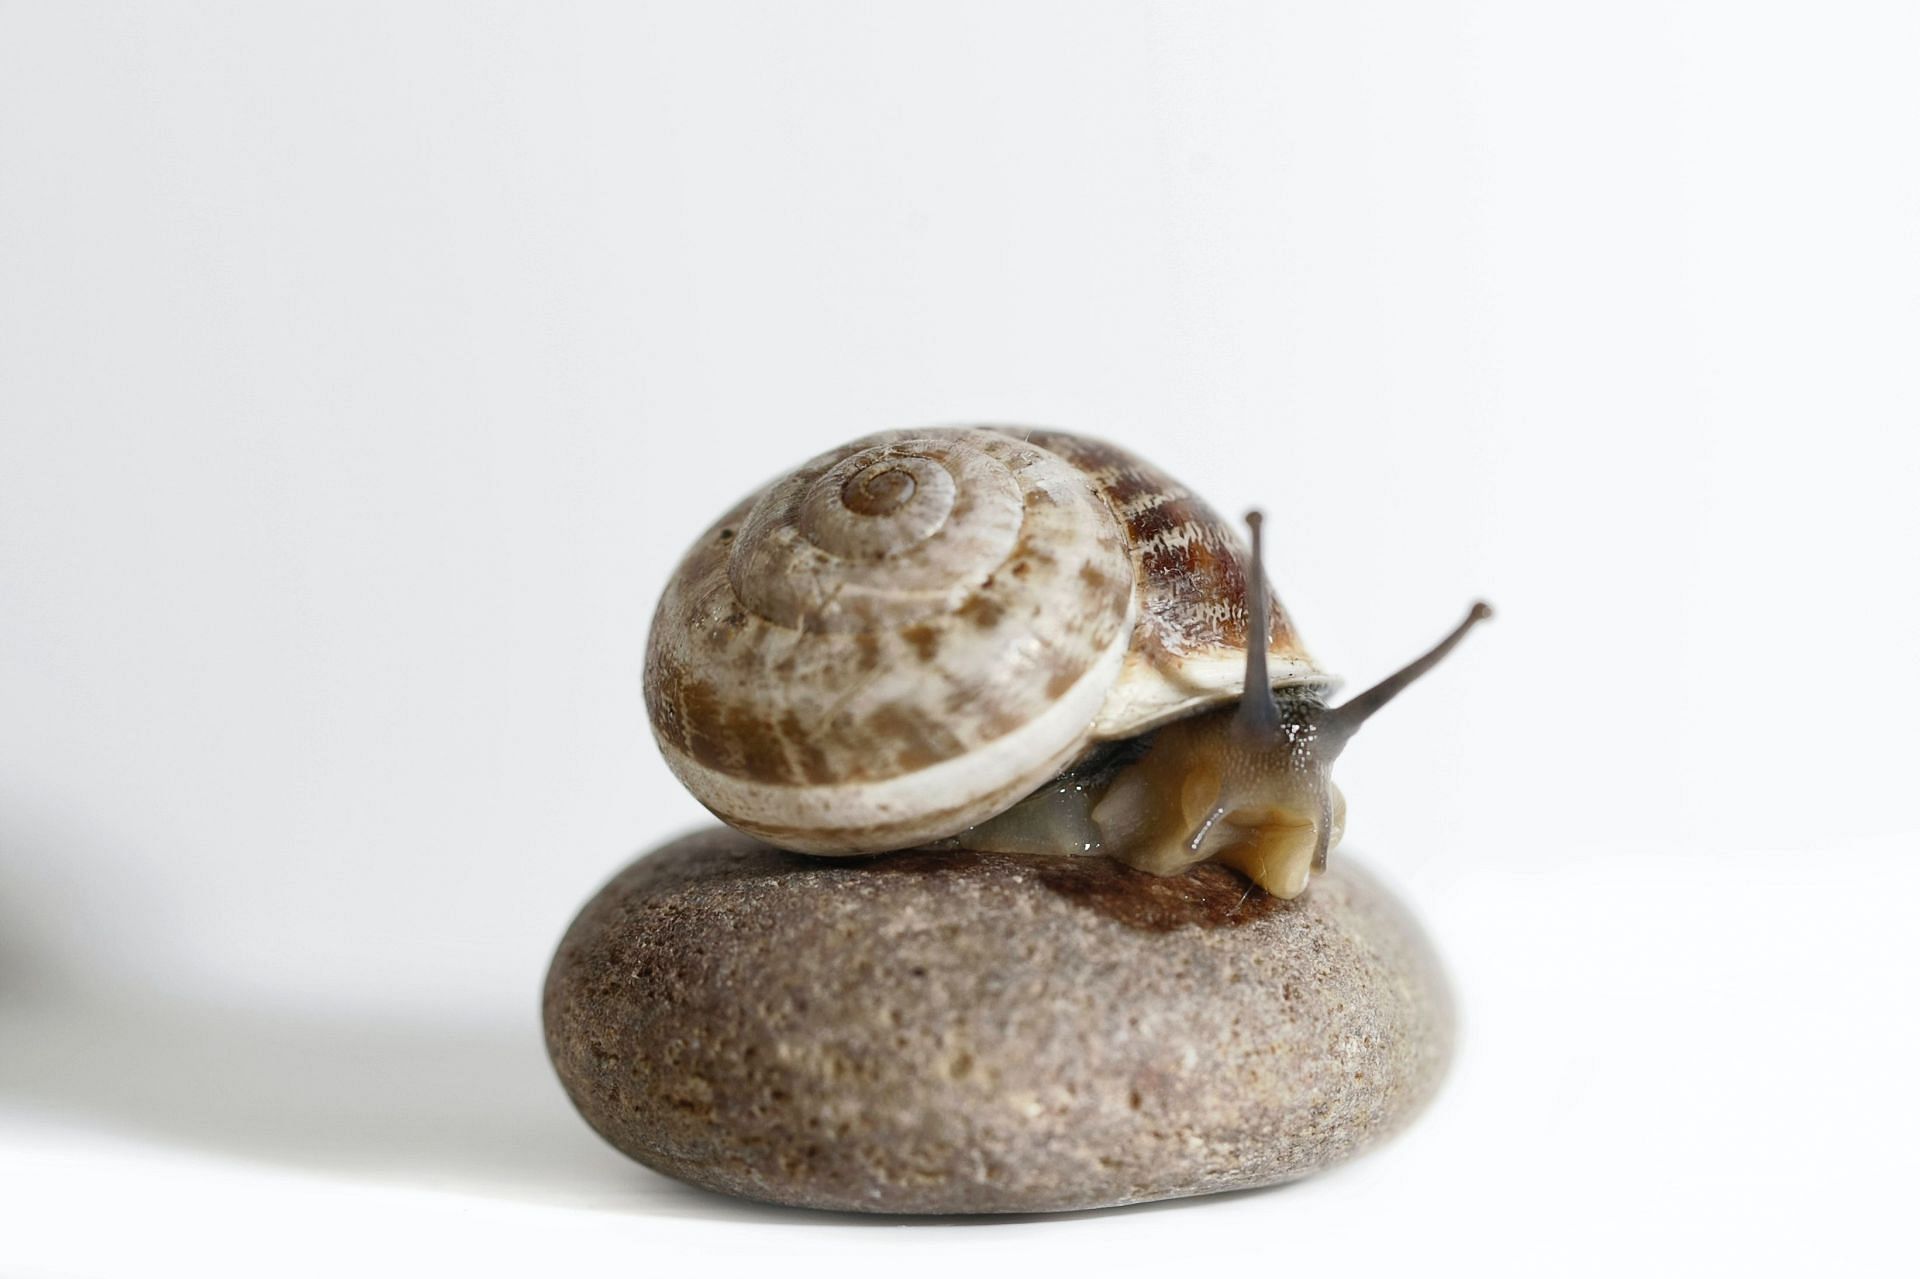 Snail mucin is the gel produced from the mucus of the outer shell. (Image via Pexels/John)